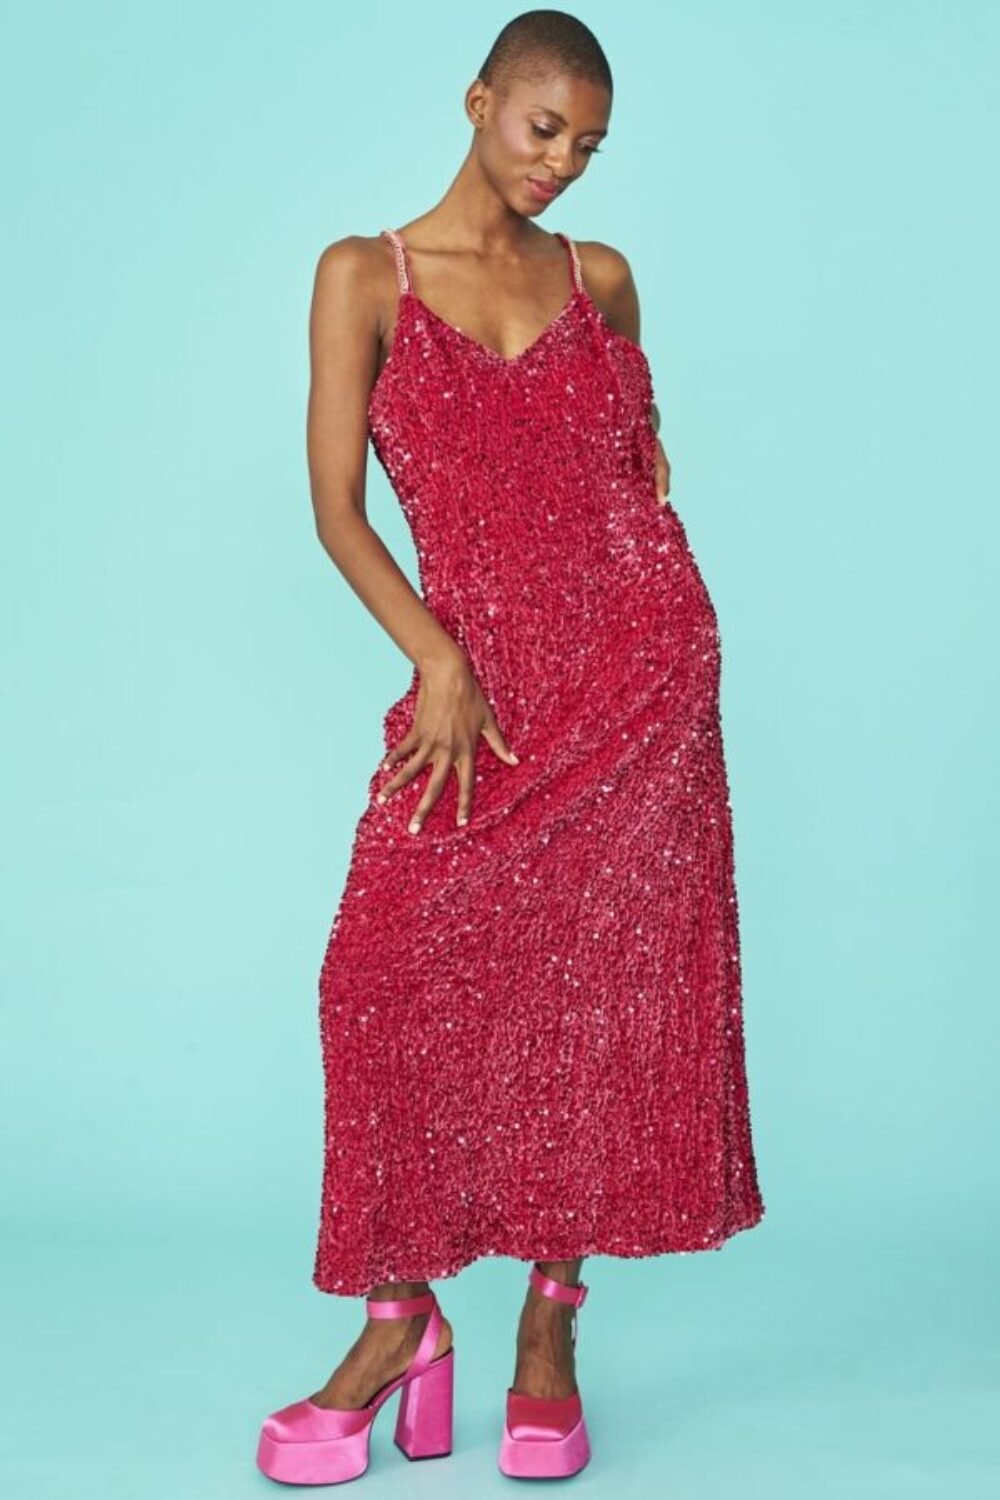 Shop Lux Pink Maxi Sequin Cami Dress and women's luxury and designer clothes at www.lux-apparel.co.uk